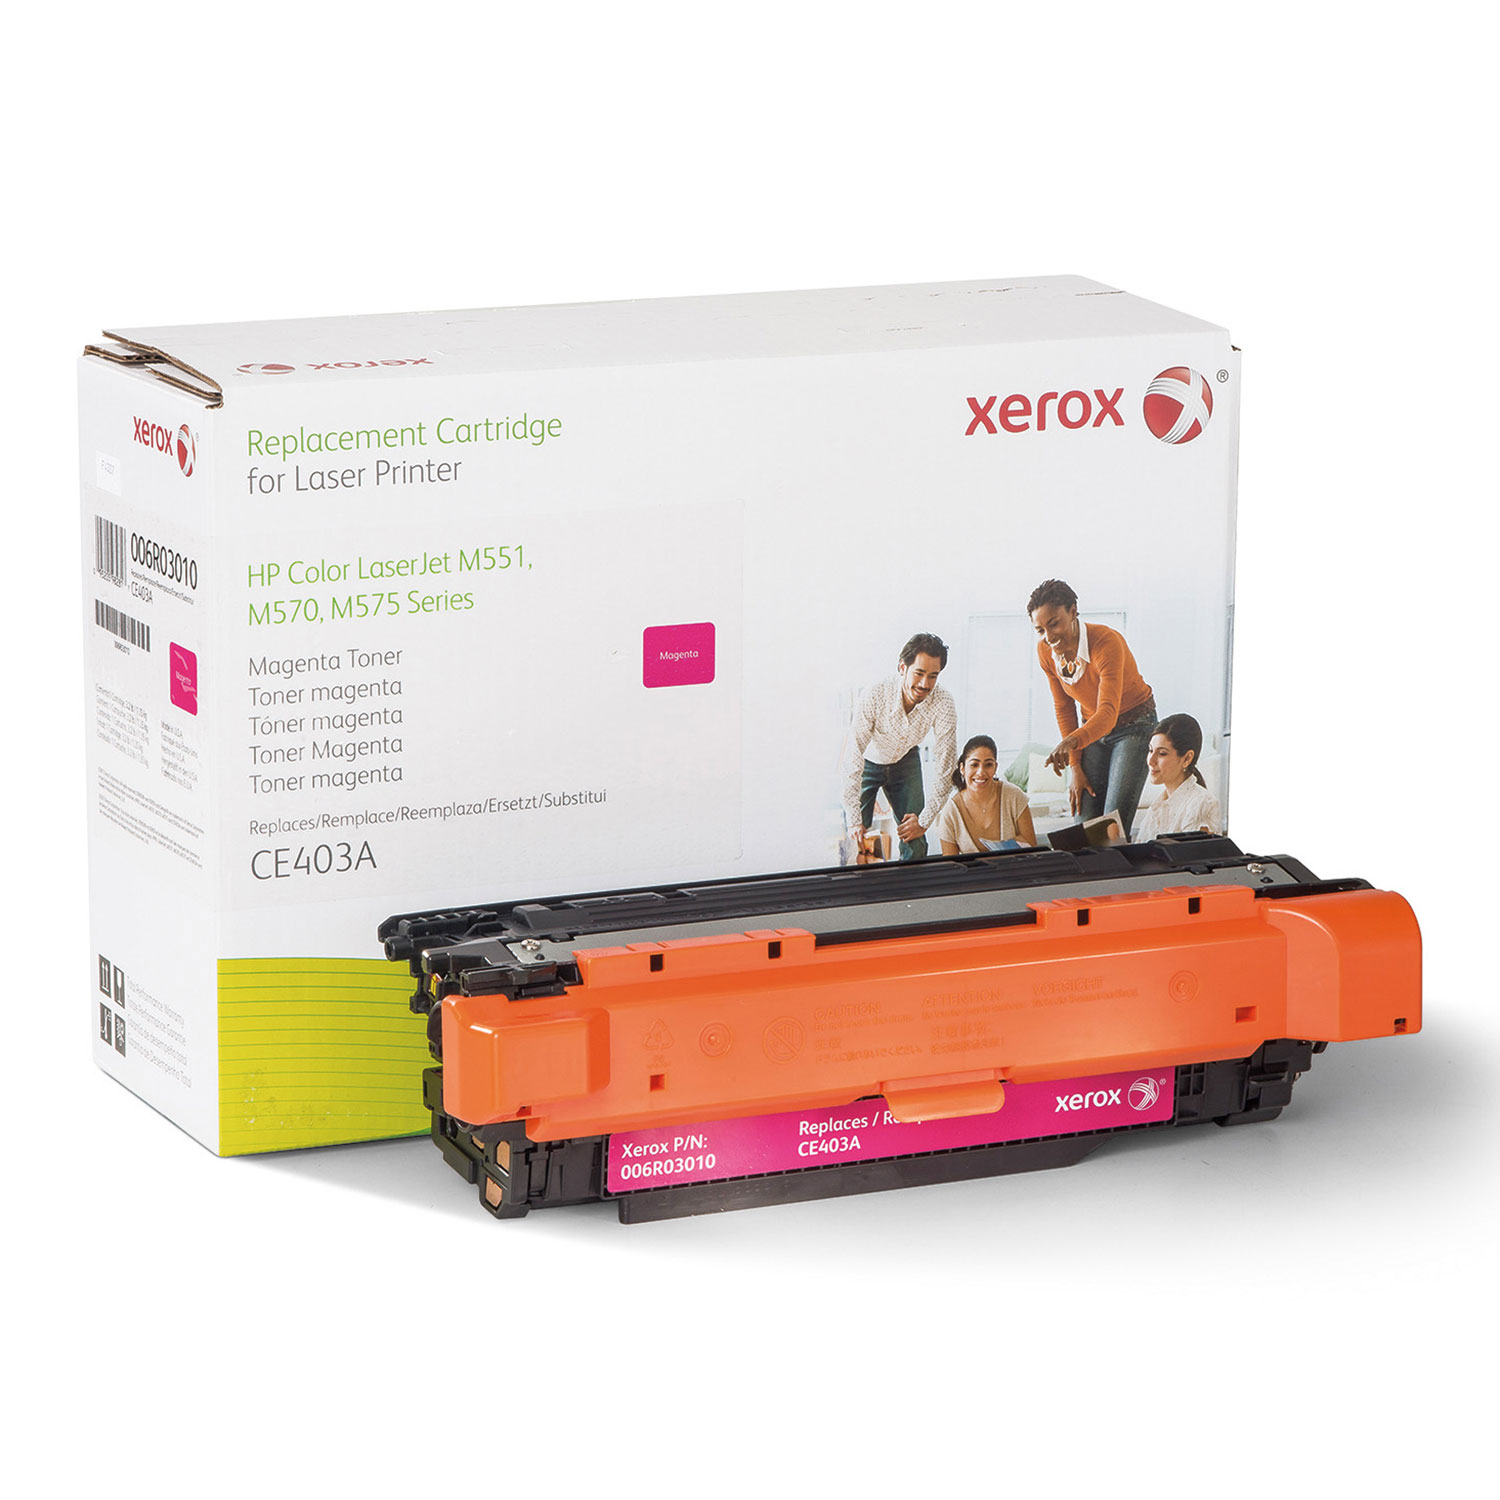  Xerox 006R03010 006R03010 Replacement Toner for CE403A (507A), Magenta (XER006R03010) 